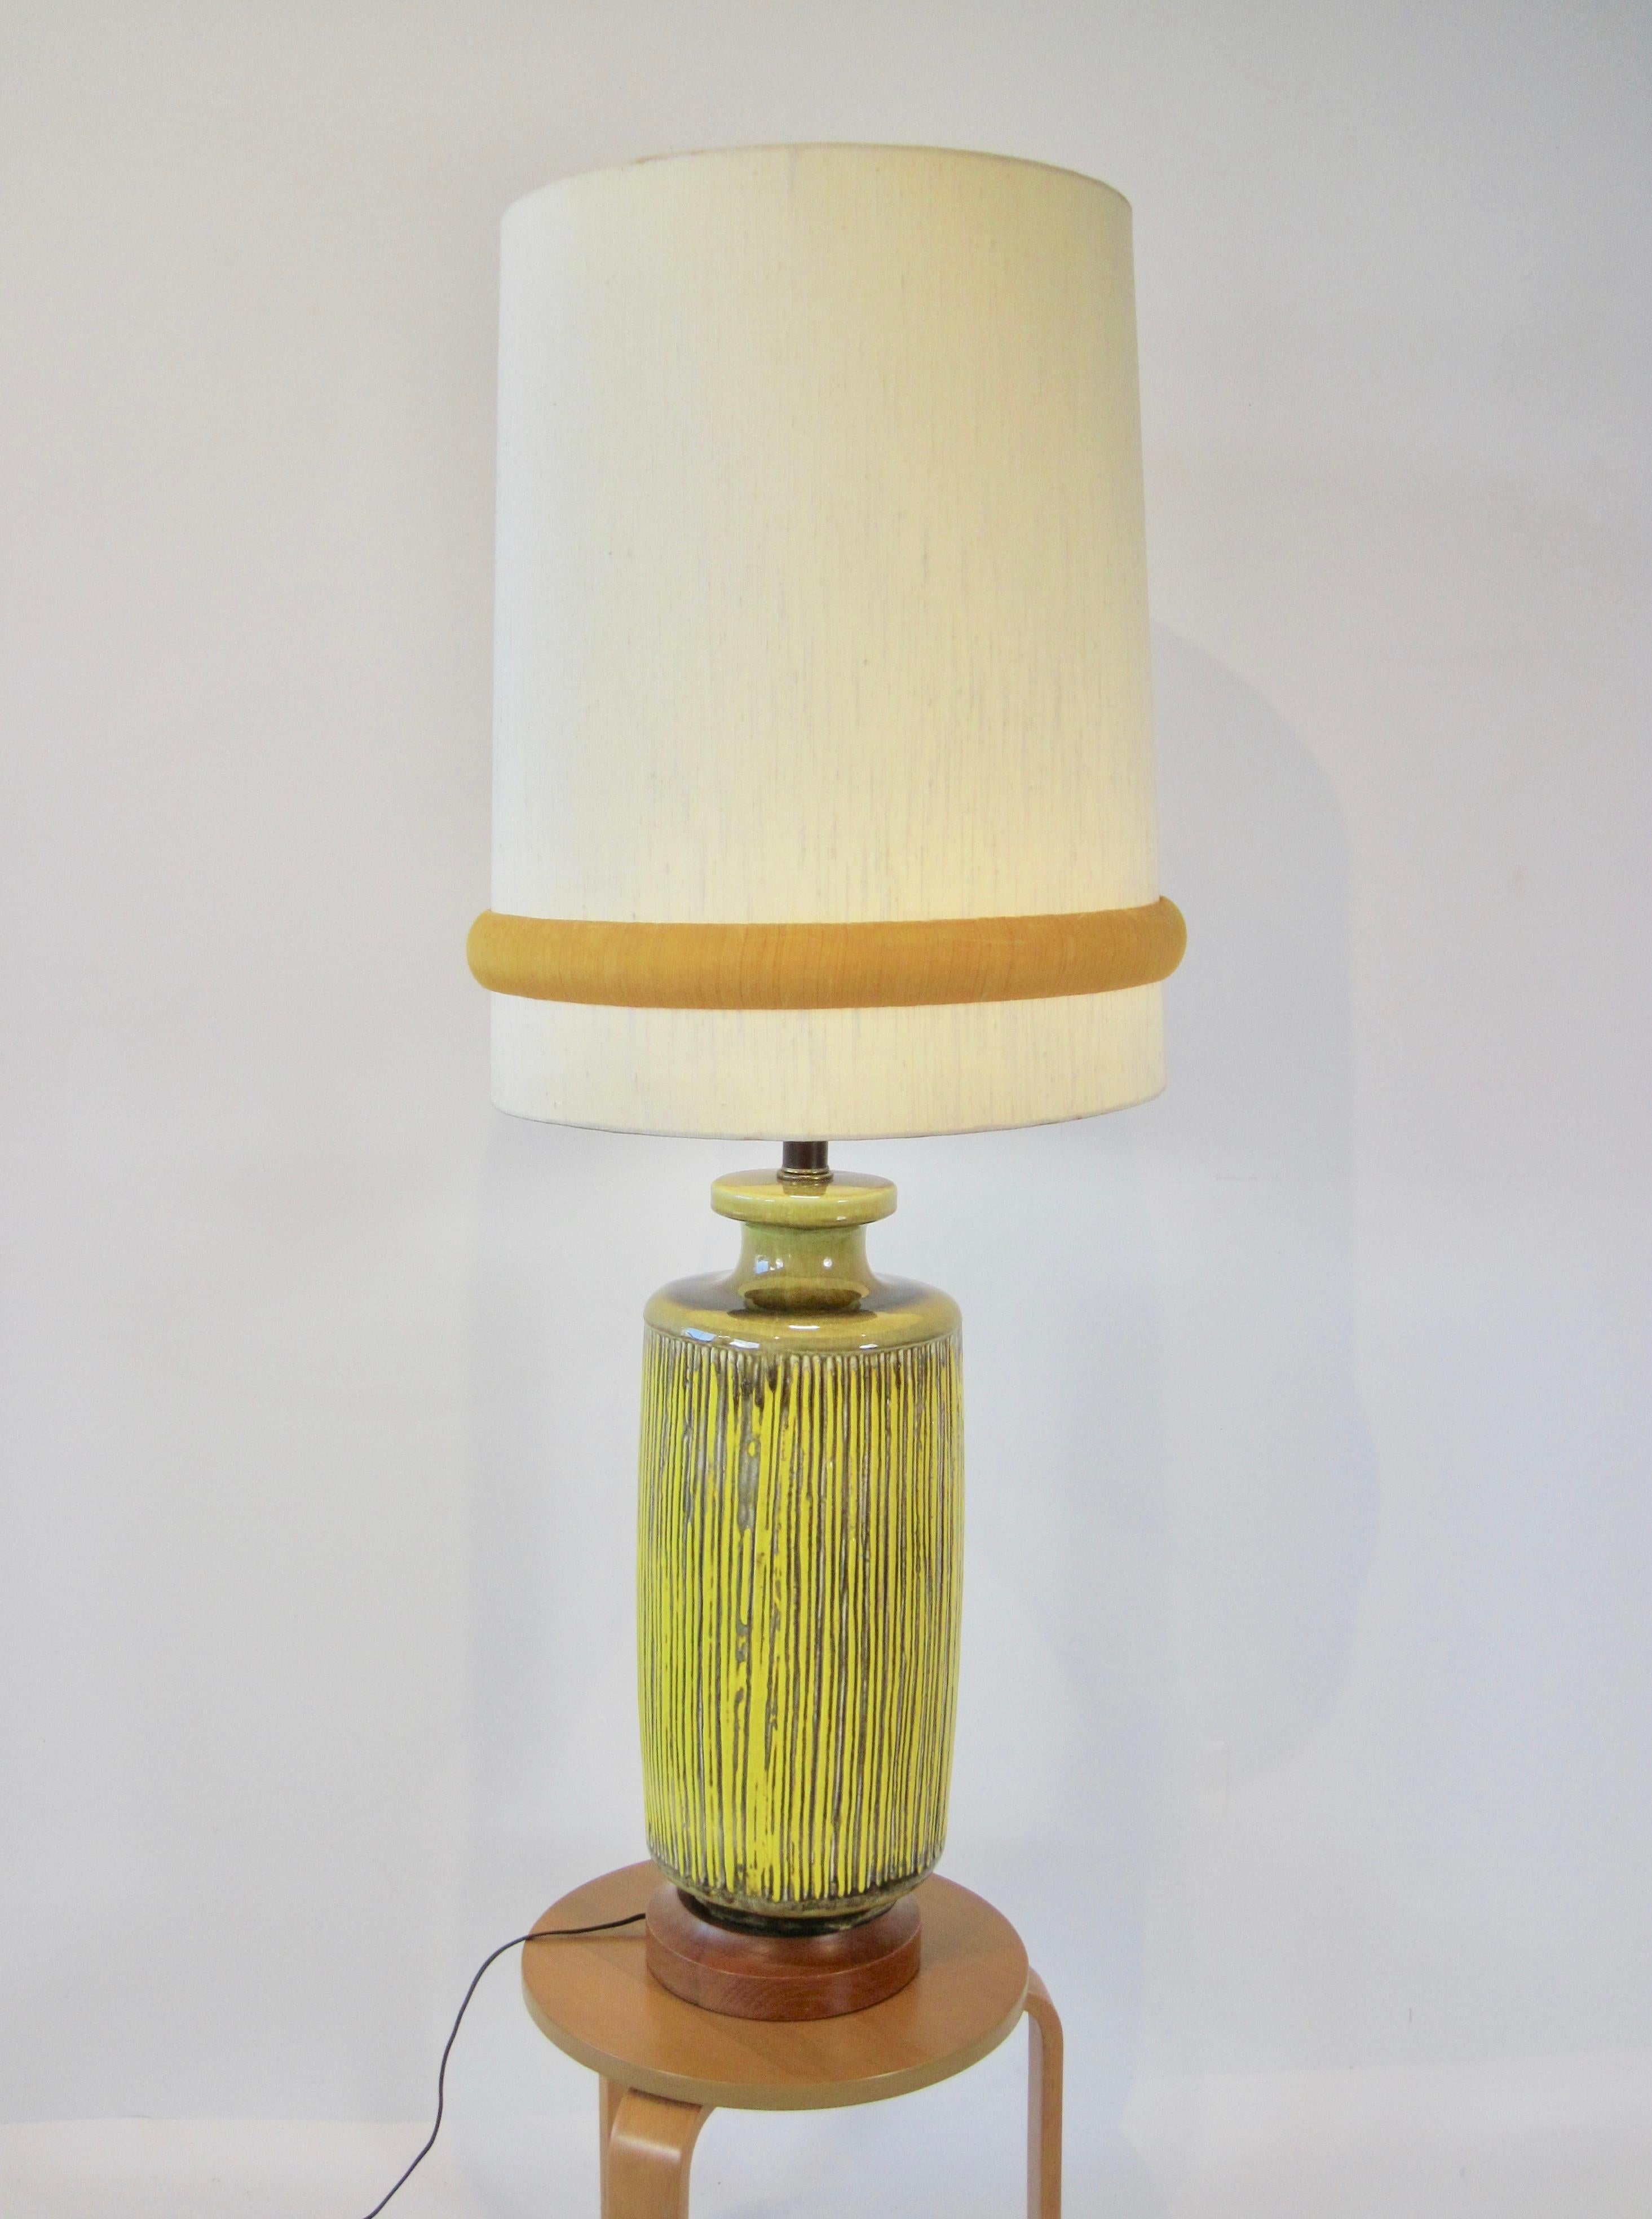 Reed style ceramic bottle neck lamp in yellow and olive green with wood base, and monumental shade. 
Can be purchased without shade, lamp measurements are 9